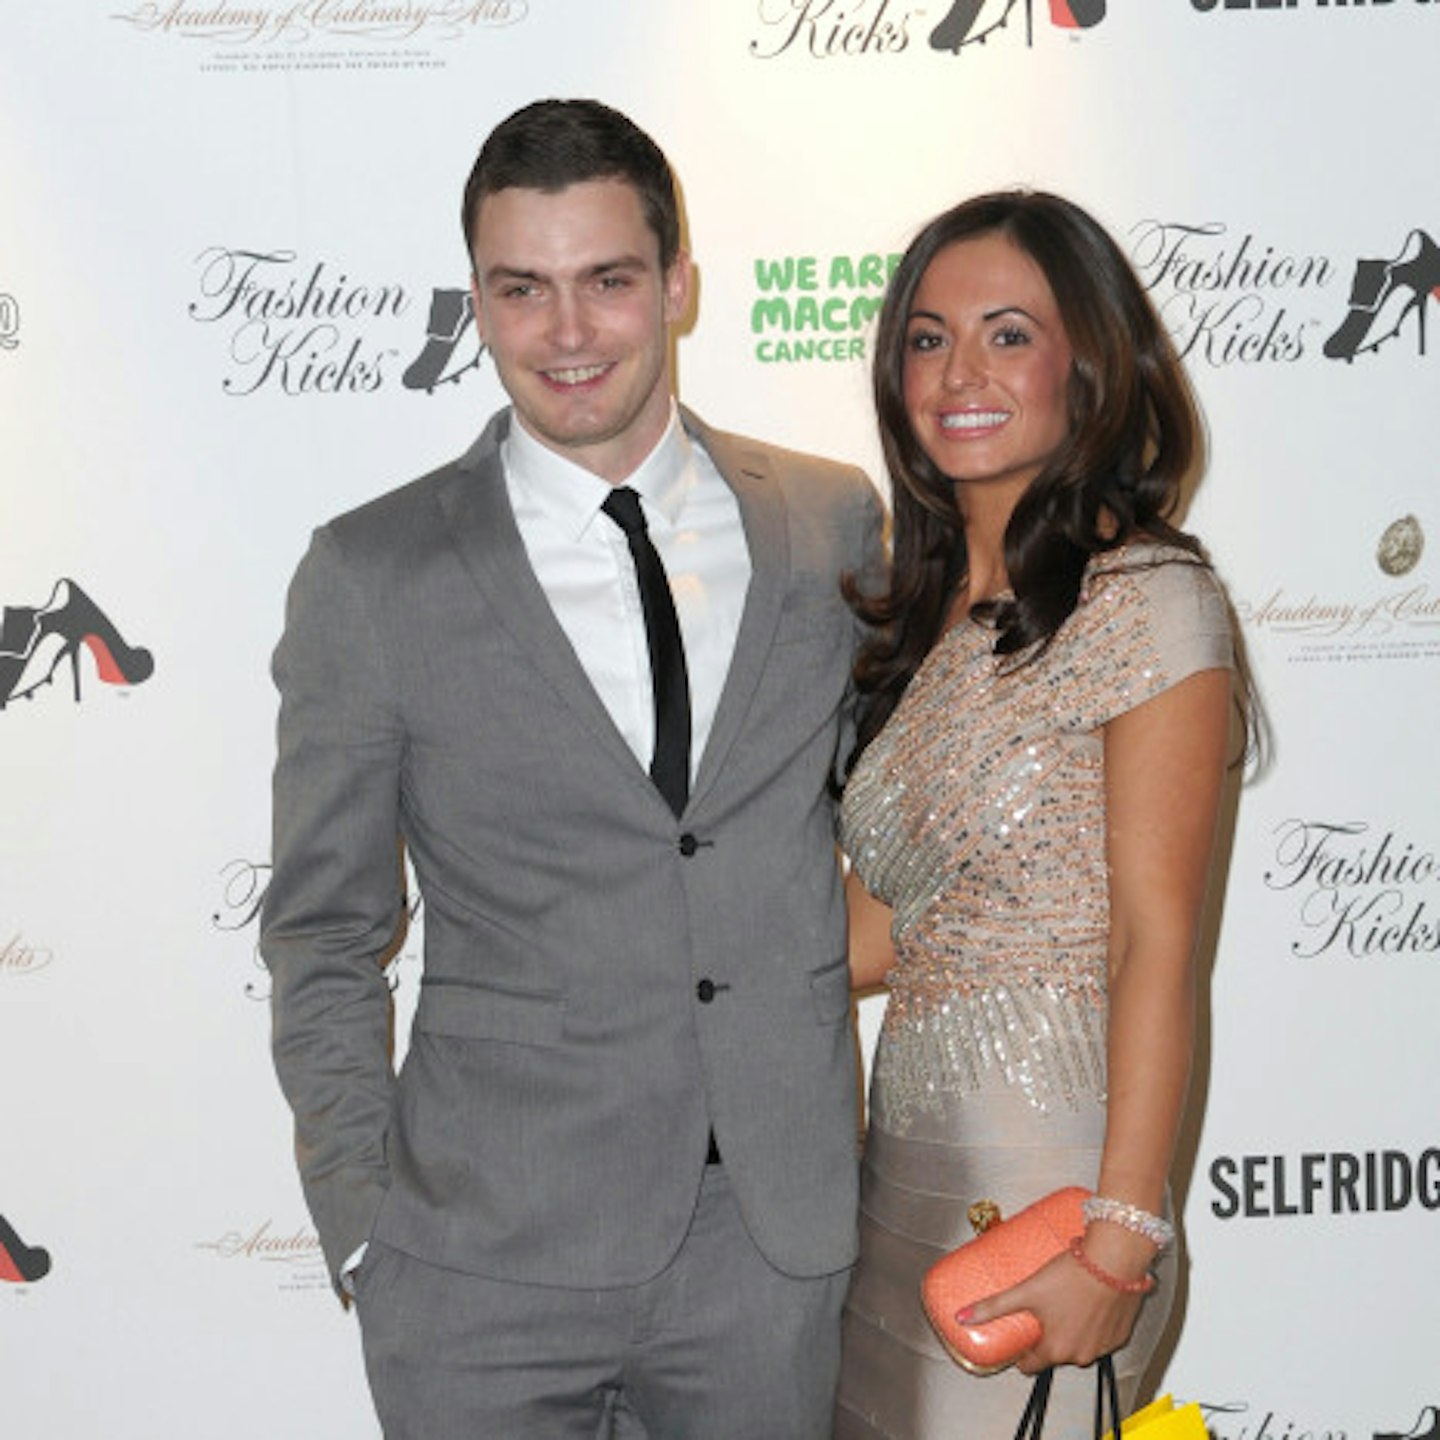 Adam and his girlfriend Stacey pictured in 2012